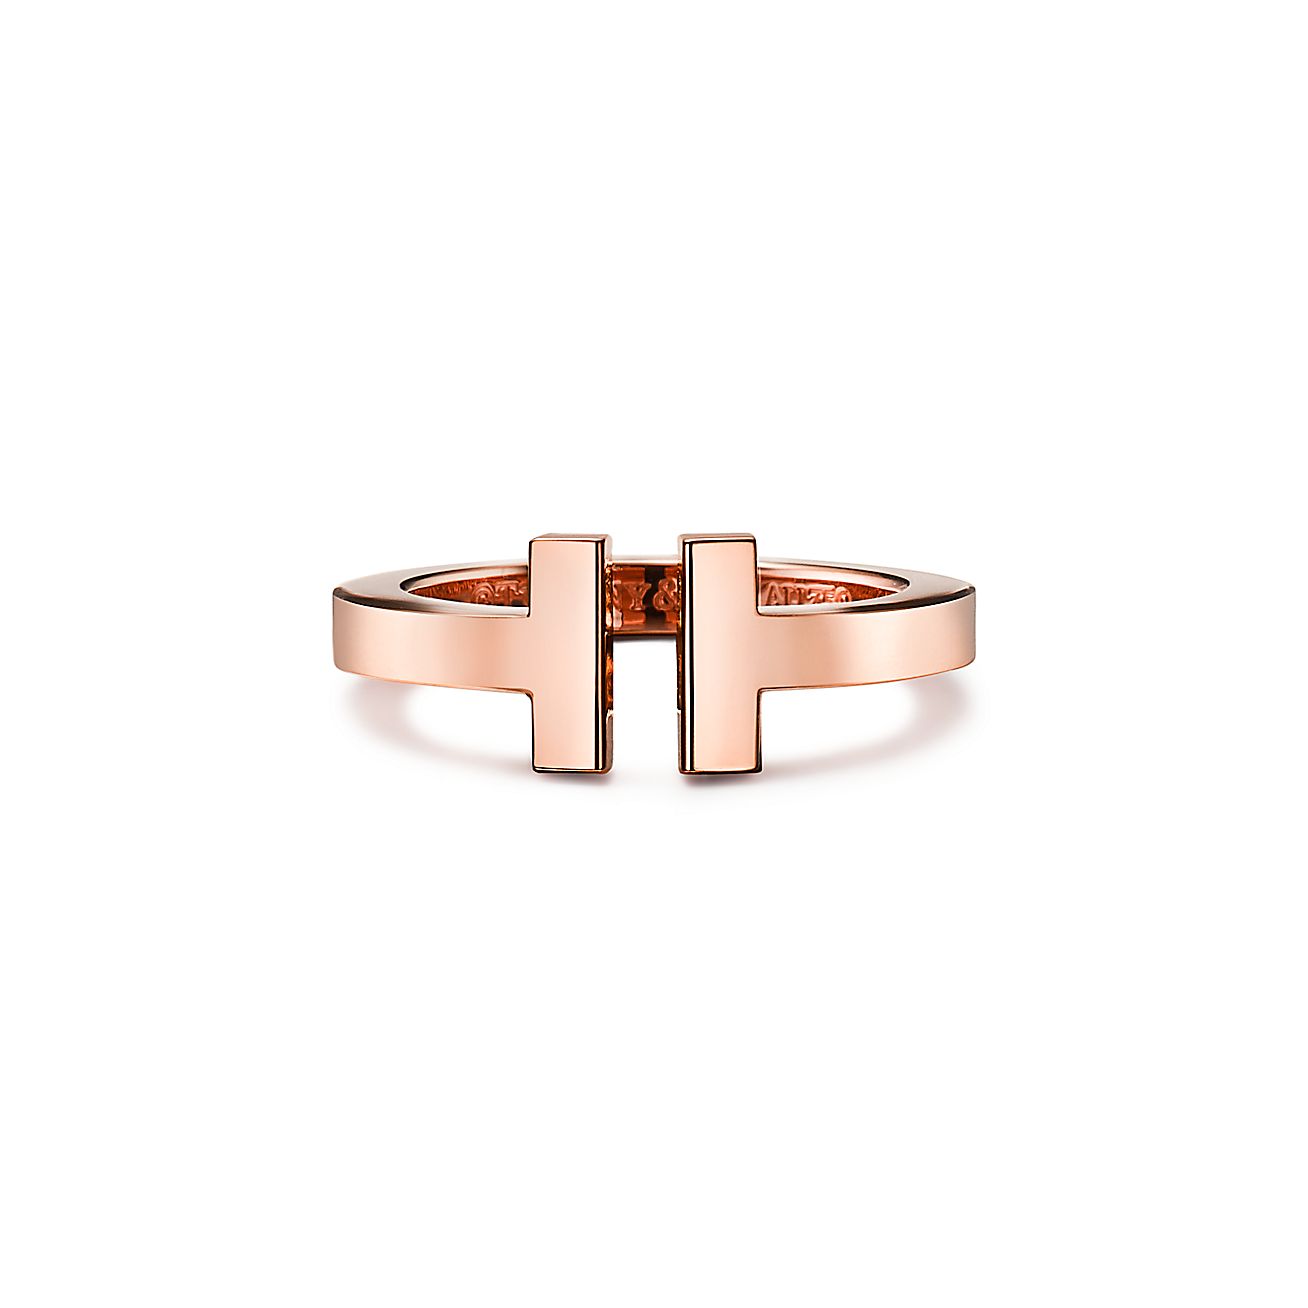 Tiffany TSquare Ring
in Rose Gold